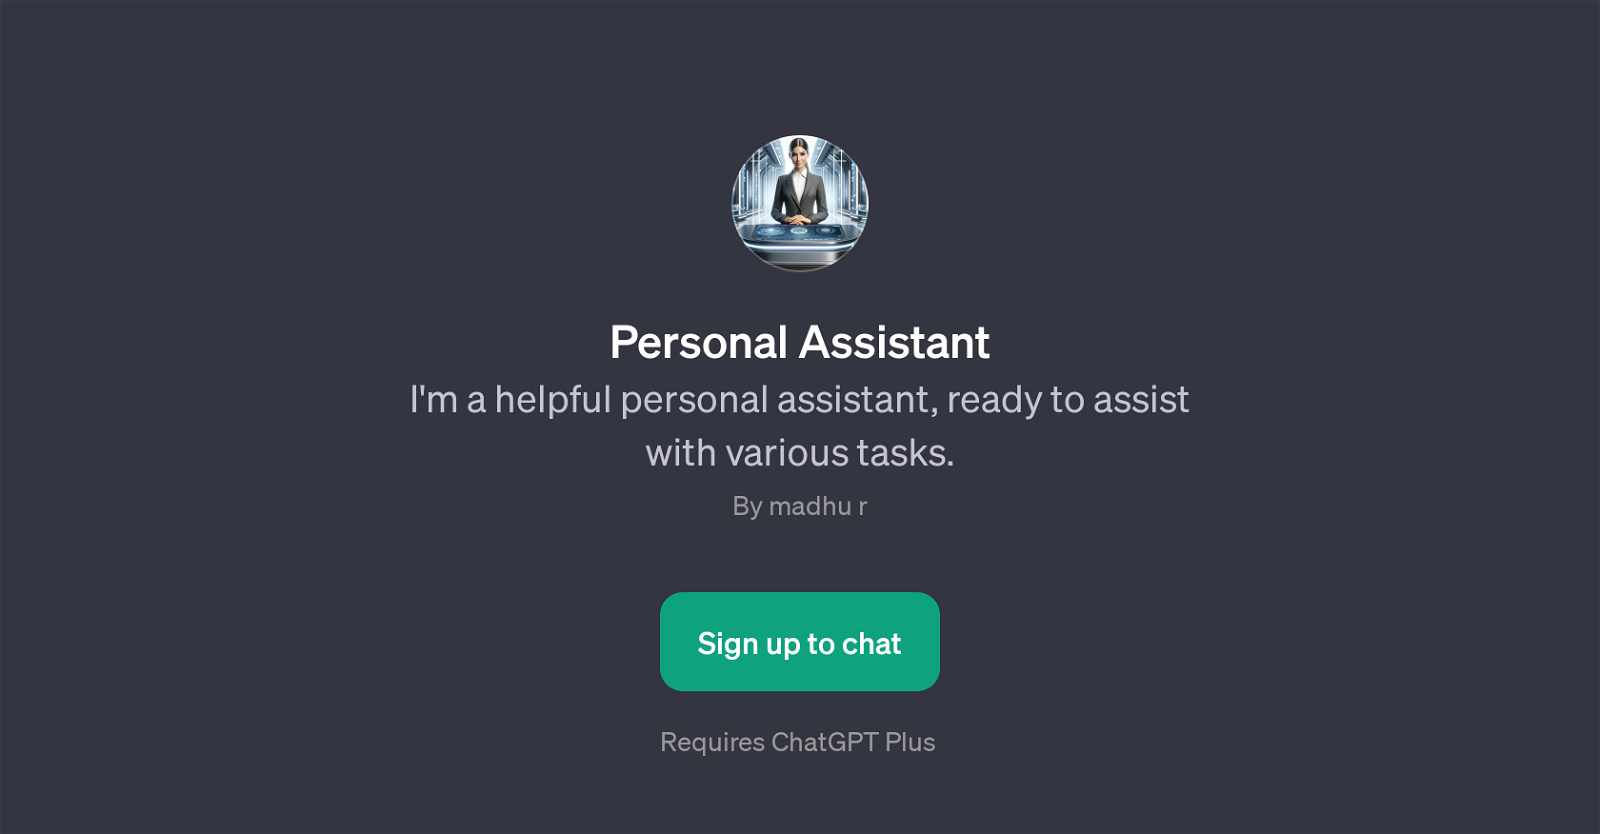 Personal Assistant website